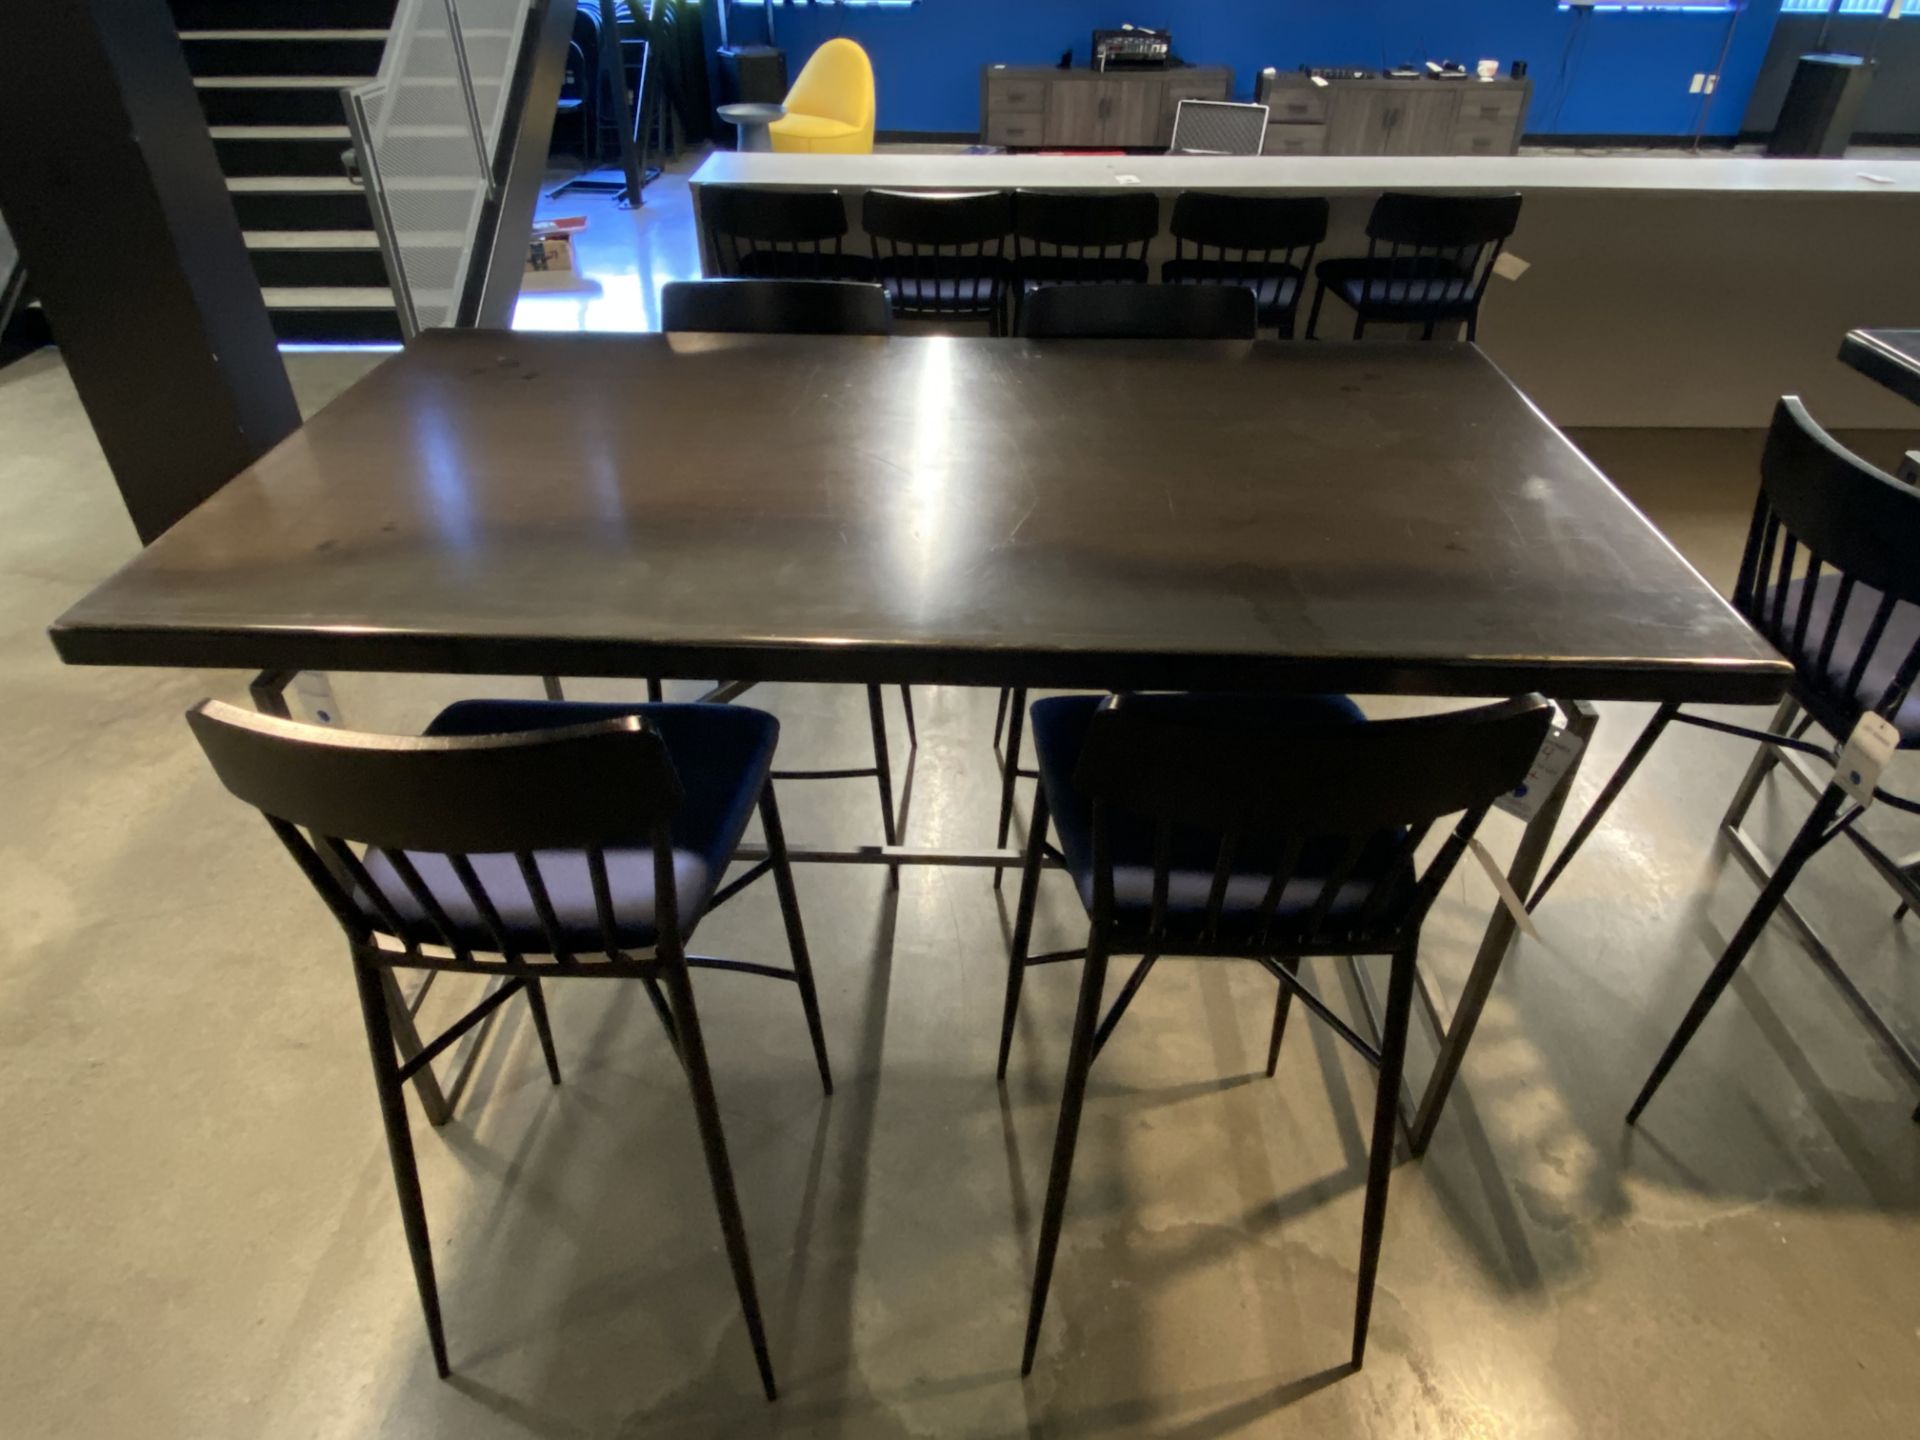 6'L x 40"W x 42"H All Steel Frame & Top Very Heavy Tables in Kitchen Area w/Workflow (4) Matching